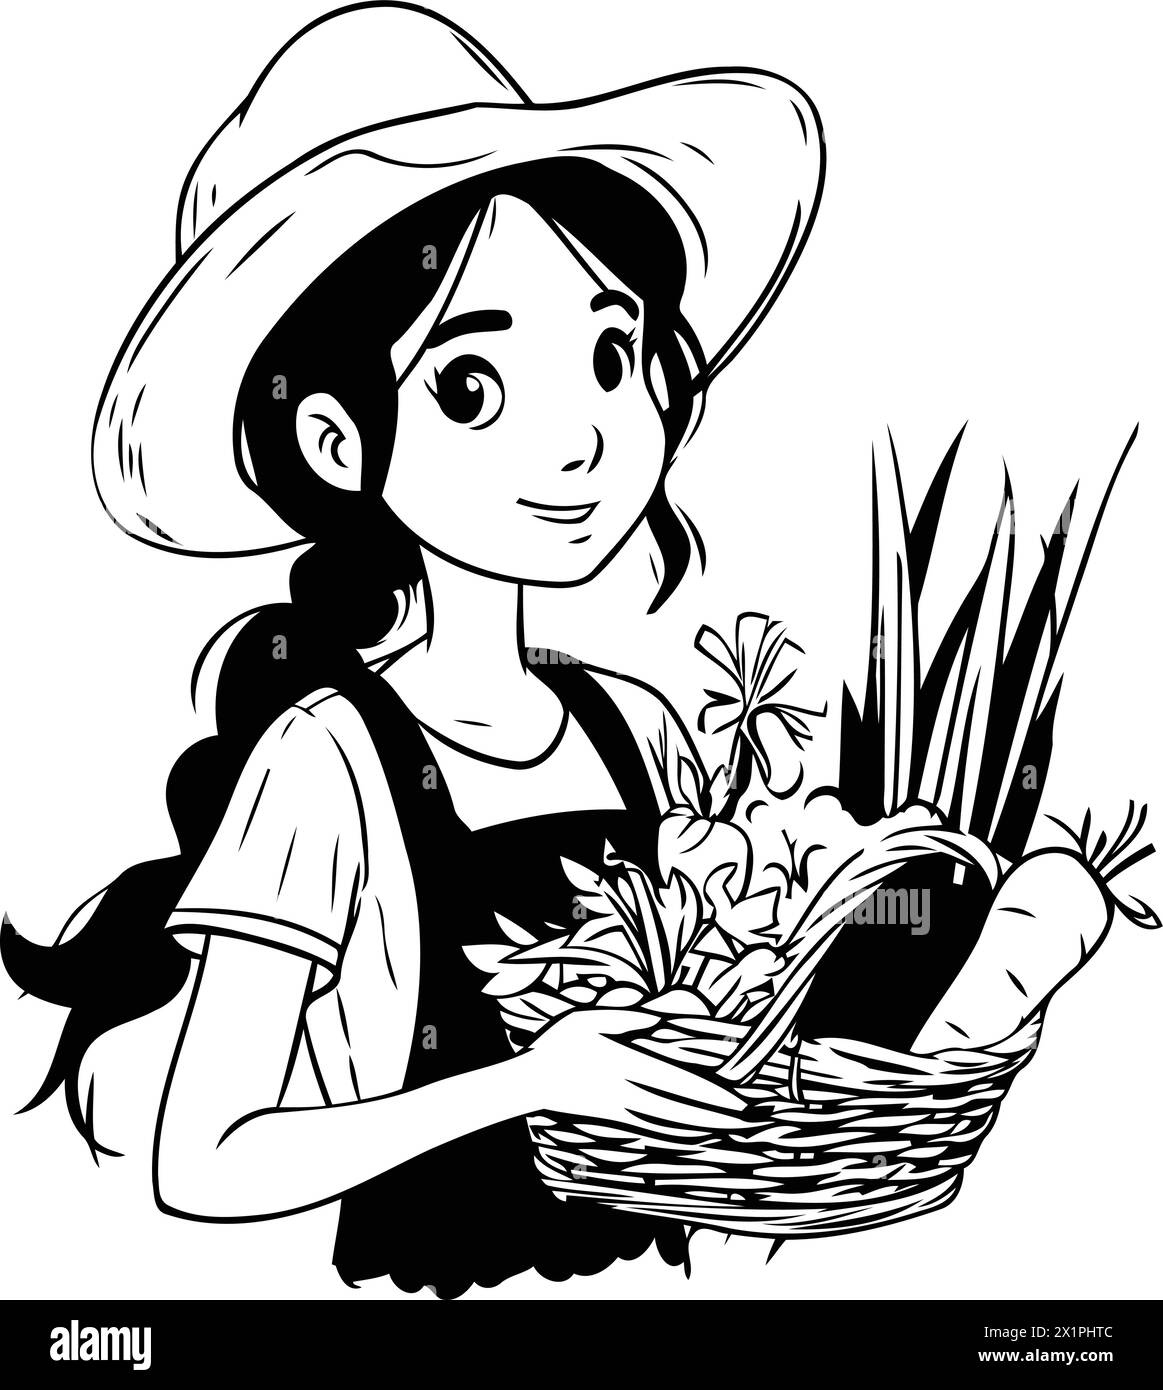 Woman farmer with basket of carrots. Vector illustration in cartoon style. Stock Vector